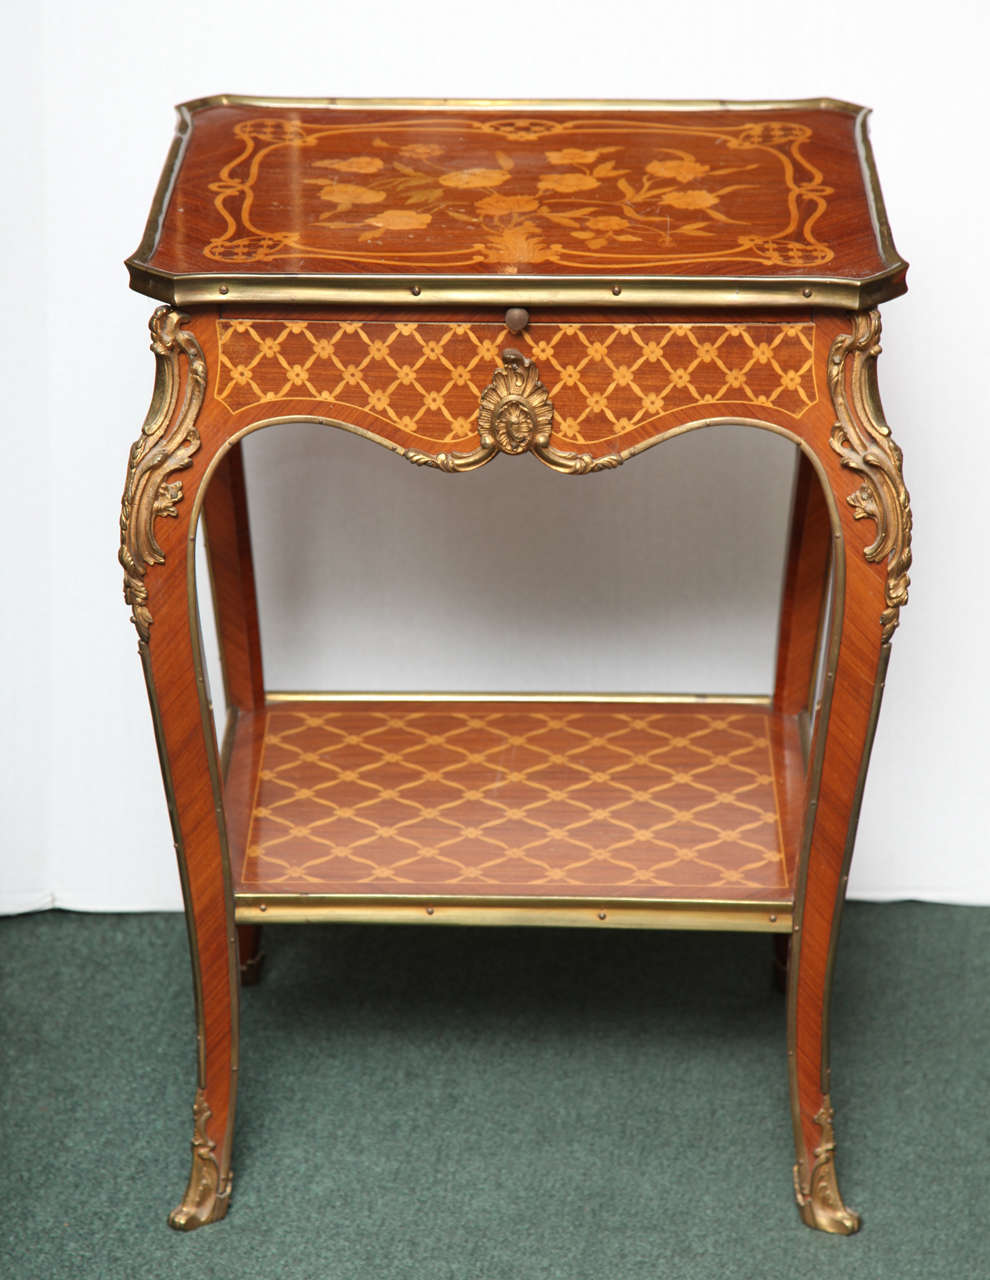 Pair of fine two tier inlaid marquetry and parquetry side tables in the Louis XV style